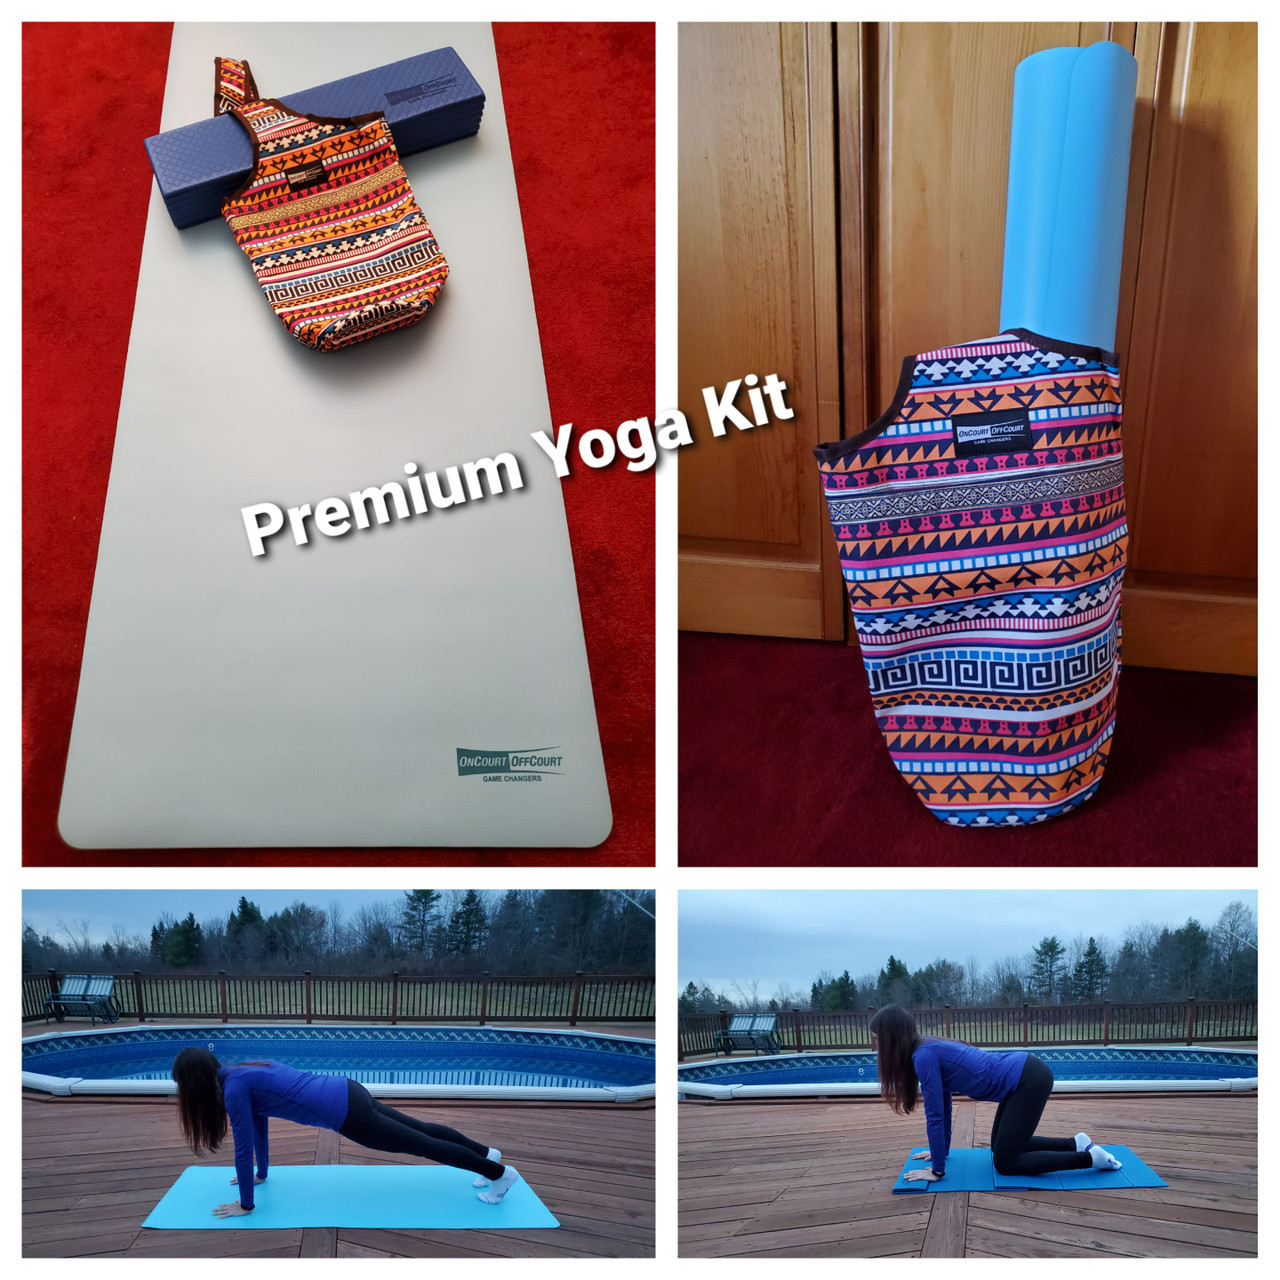 PCRF-Columbus - 16h virtual auction item is Yoga basket- $150 value Donated  by Mat Happy and #strapsbysarab Yoga mat, 5 class passes ( Hilliard  location only), Water cup, Yoga block, Microfiber towel